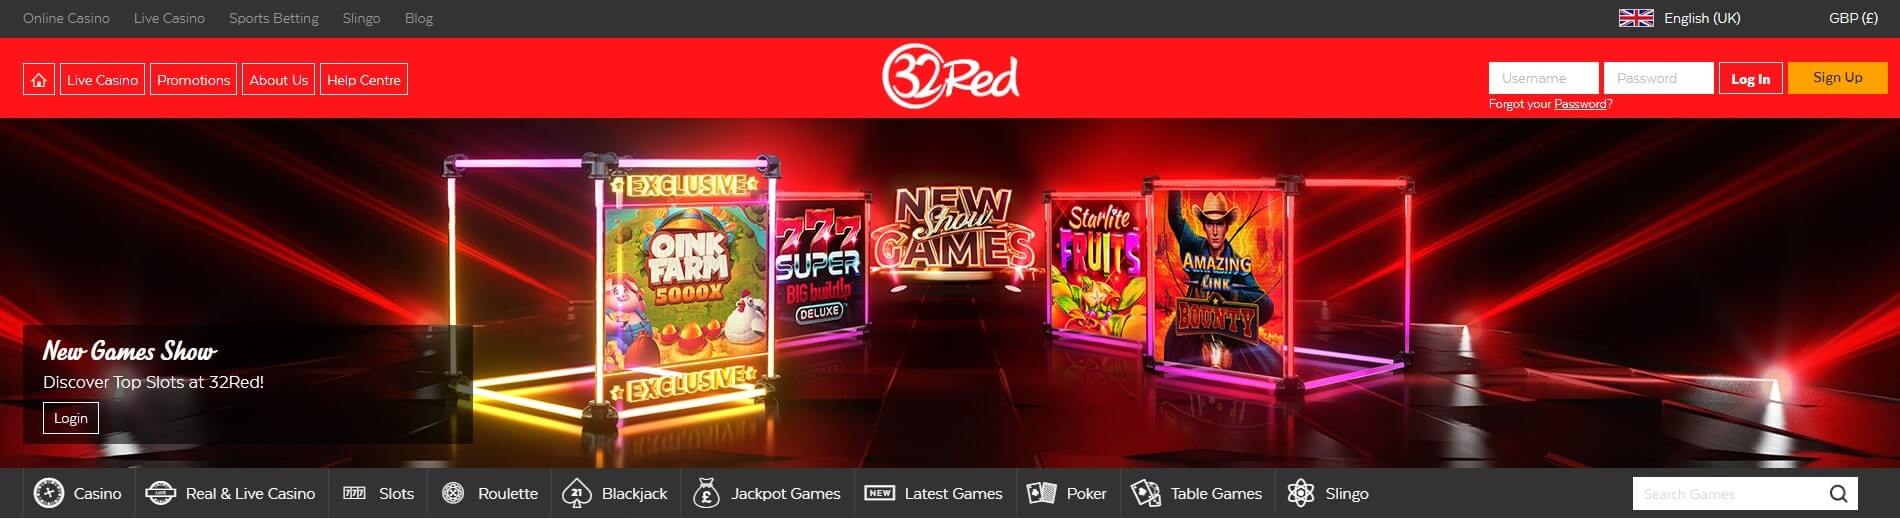 32red casino new games show